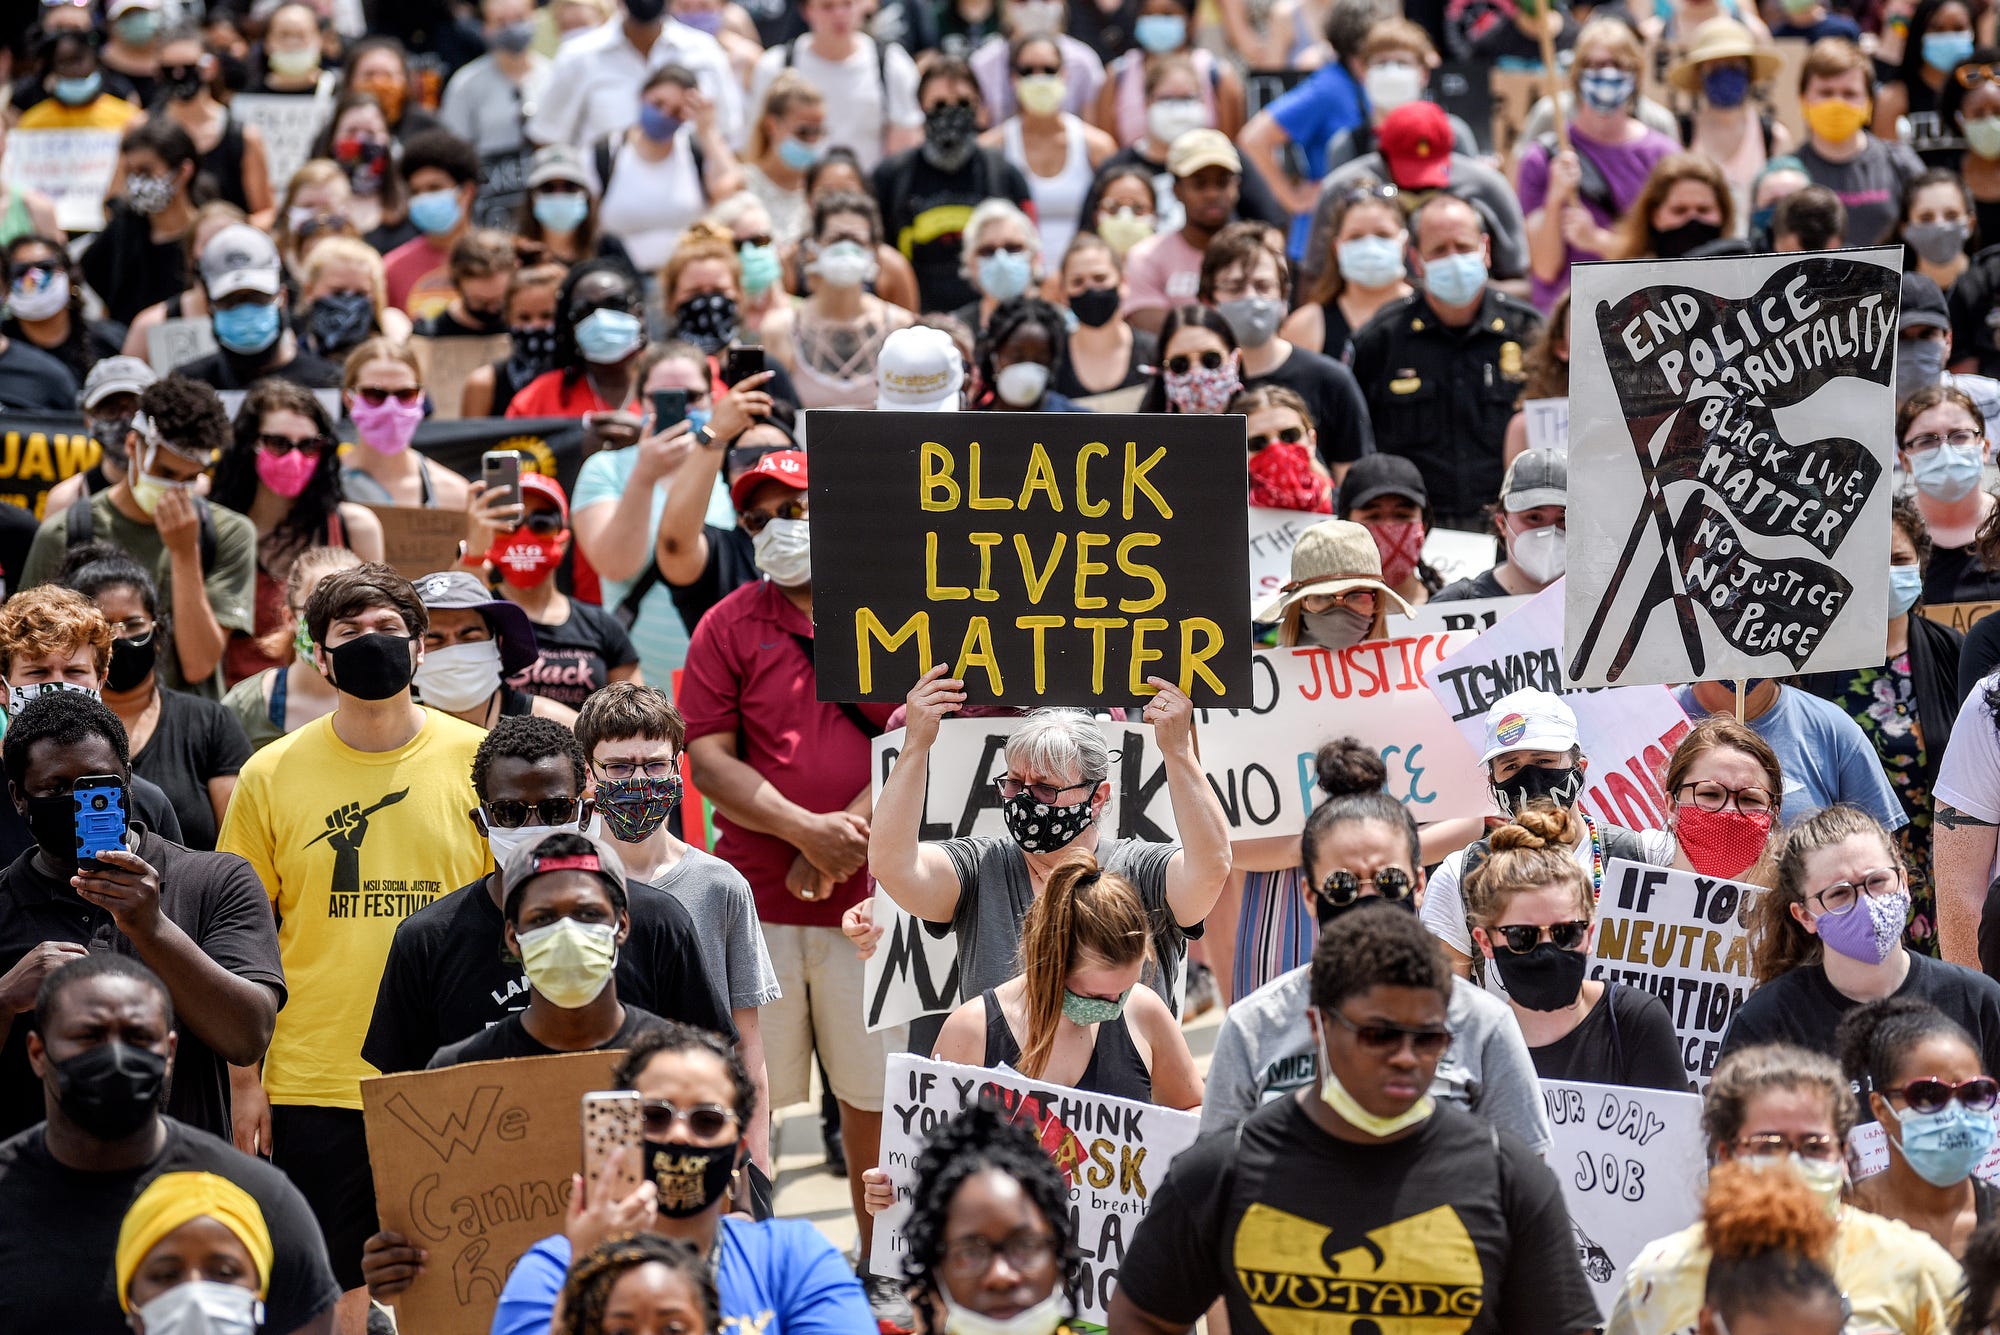 PHOTO: Demonstrators gather at the Michigan State Capitol on Wednesday, June 10, 2020, in Lansing, Mich.